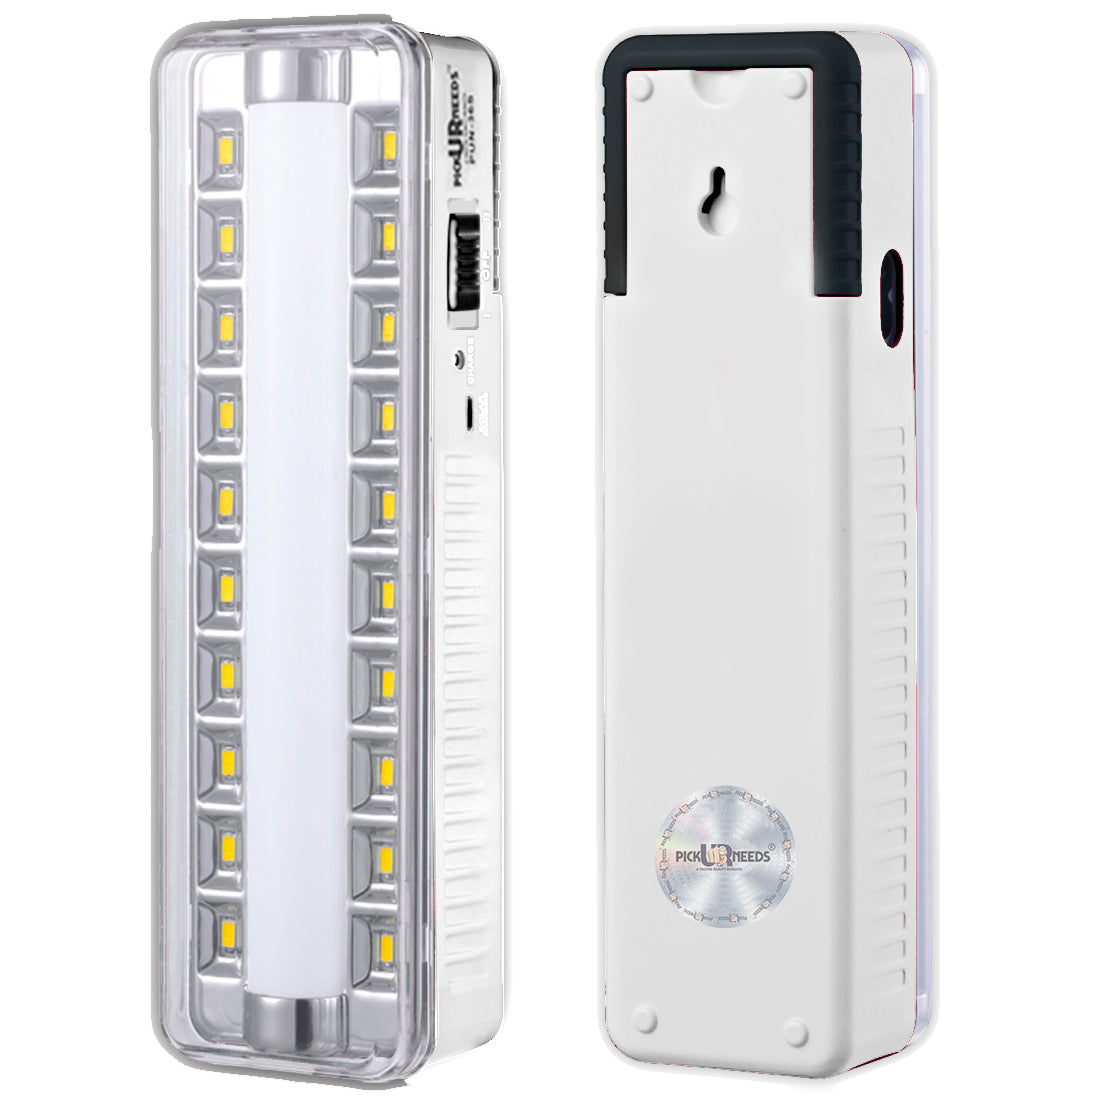 Pick Ur Needs Rechargeable High Quality 60 LED TUBE+SMD High-Bright LED 7 hrs Emergency Light